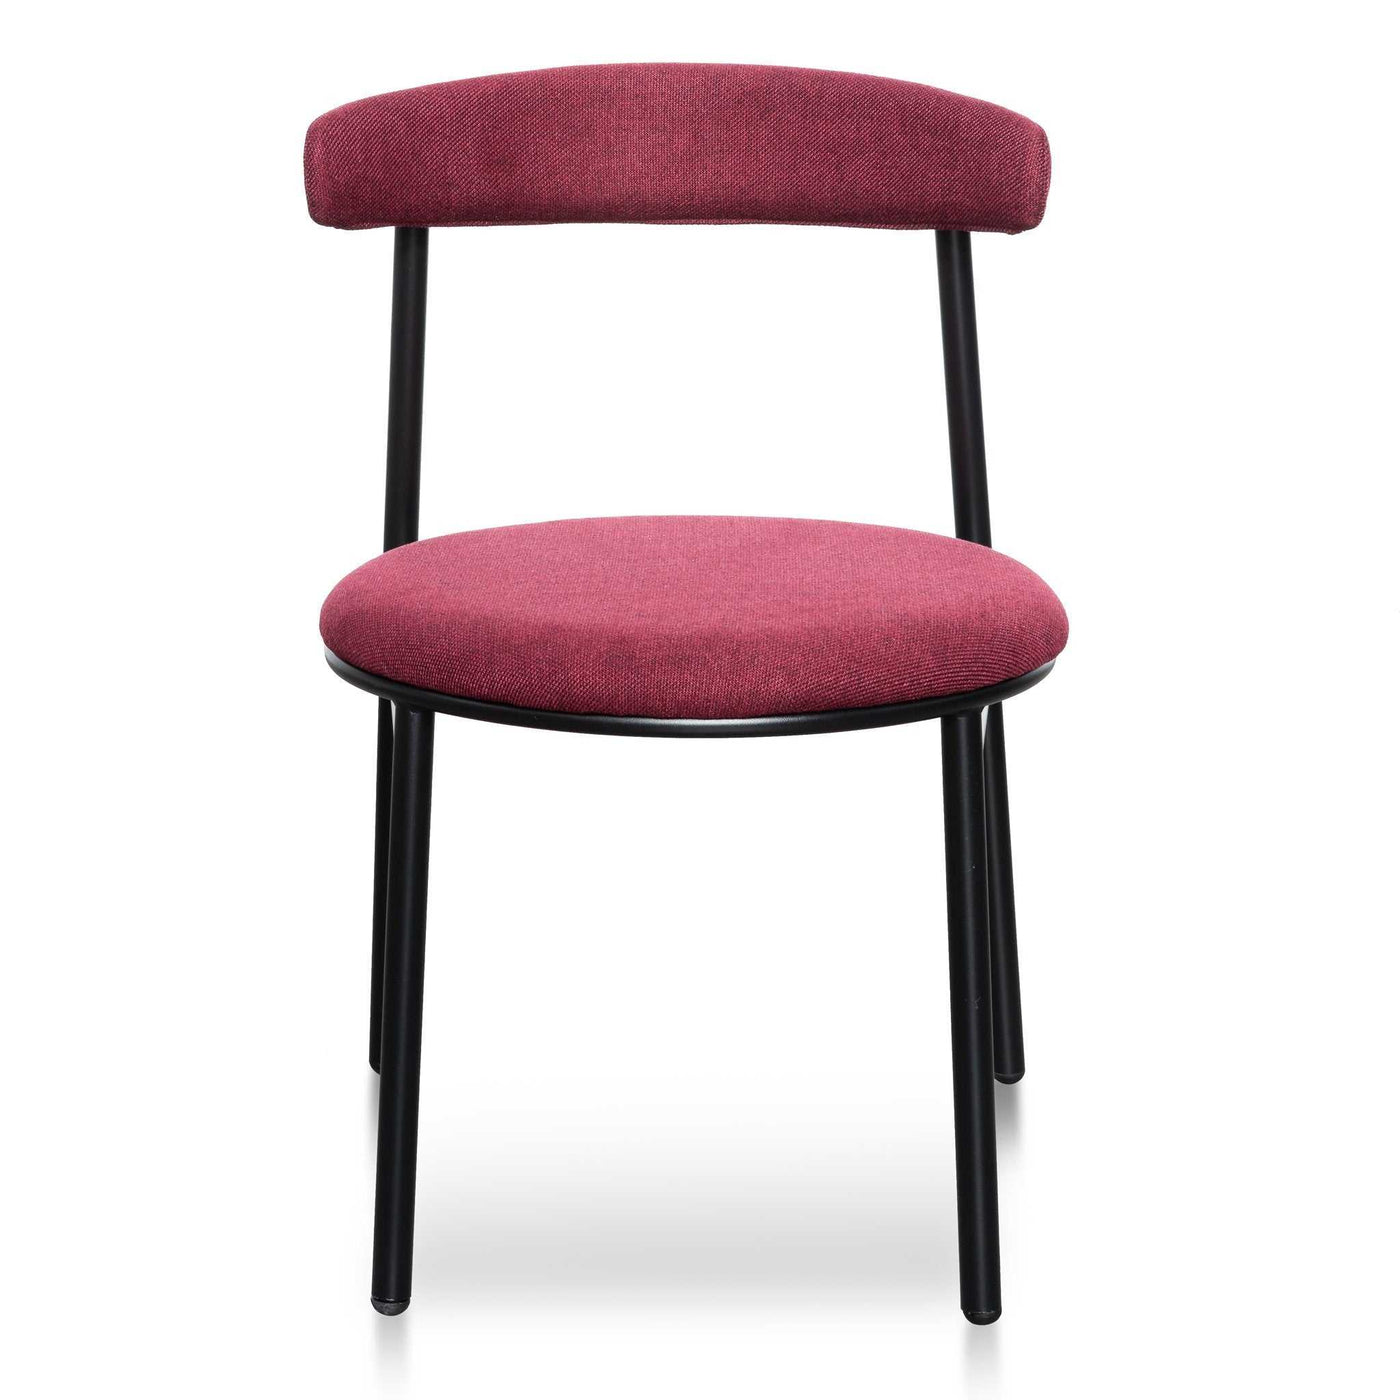 Fabric Dining Chair - Burgundy with Black Legs